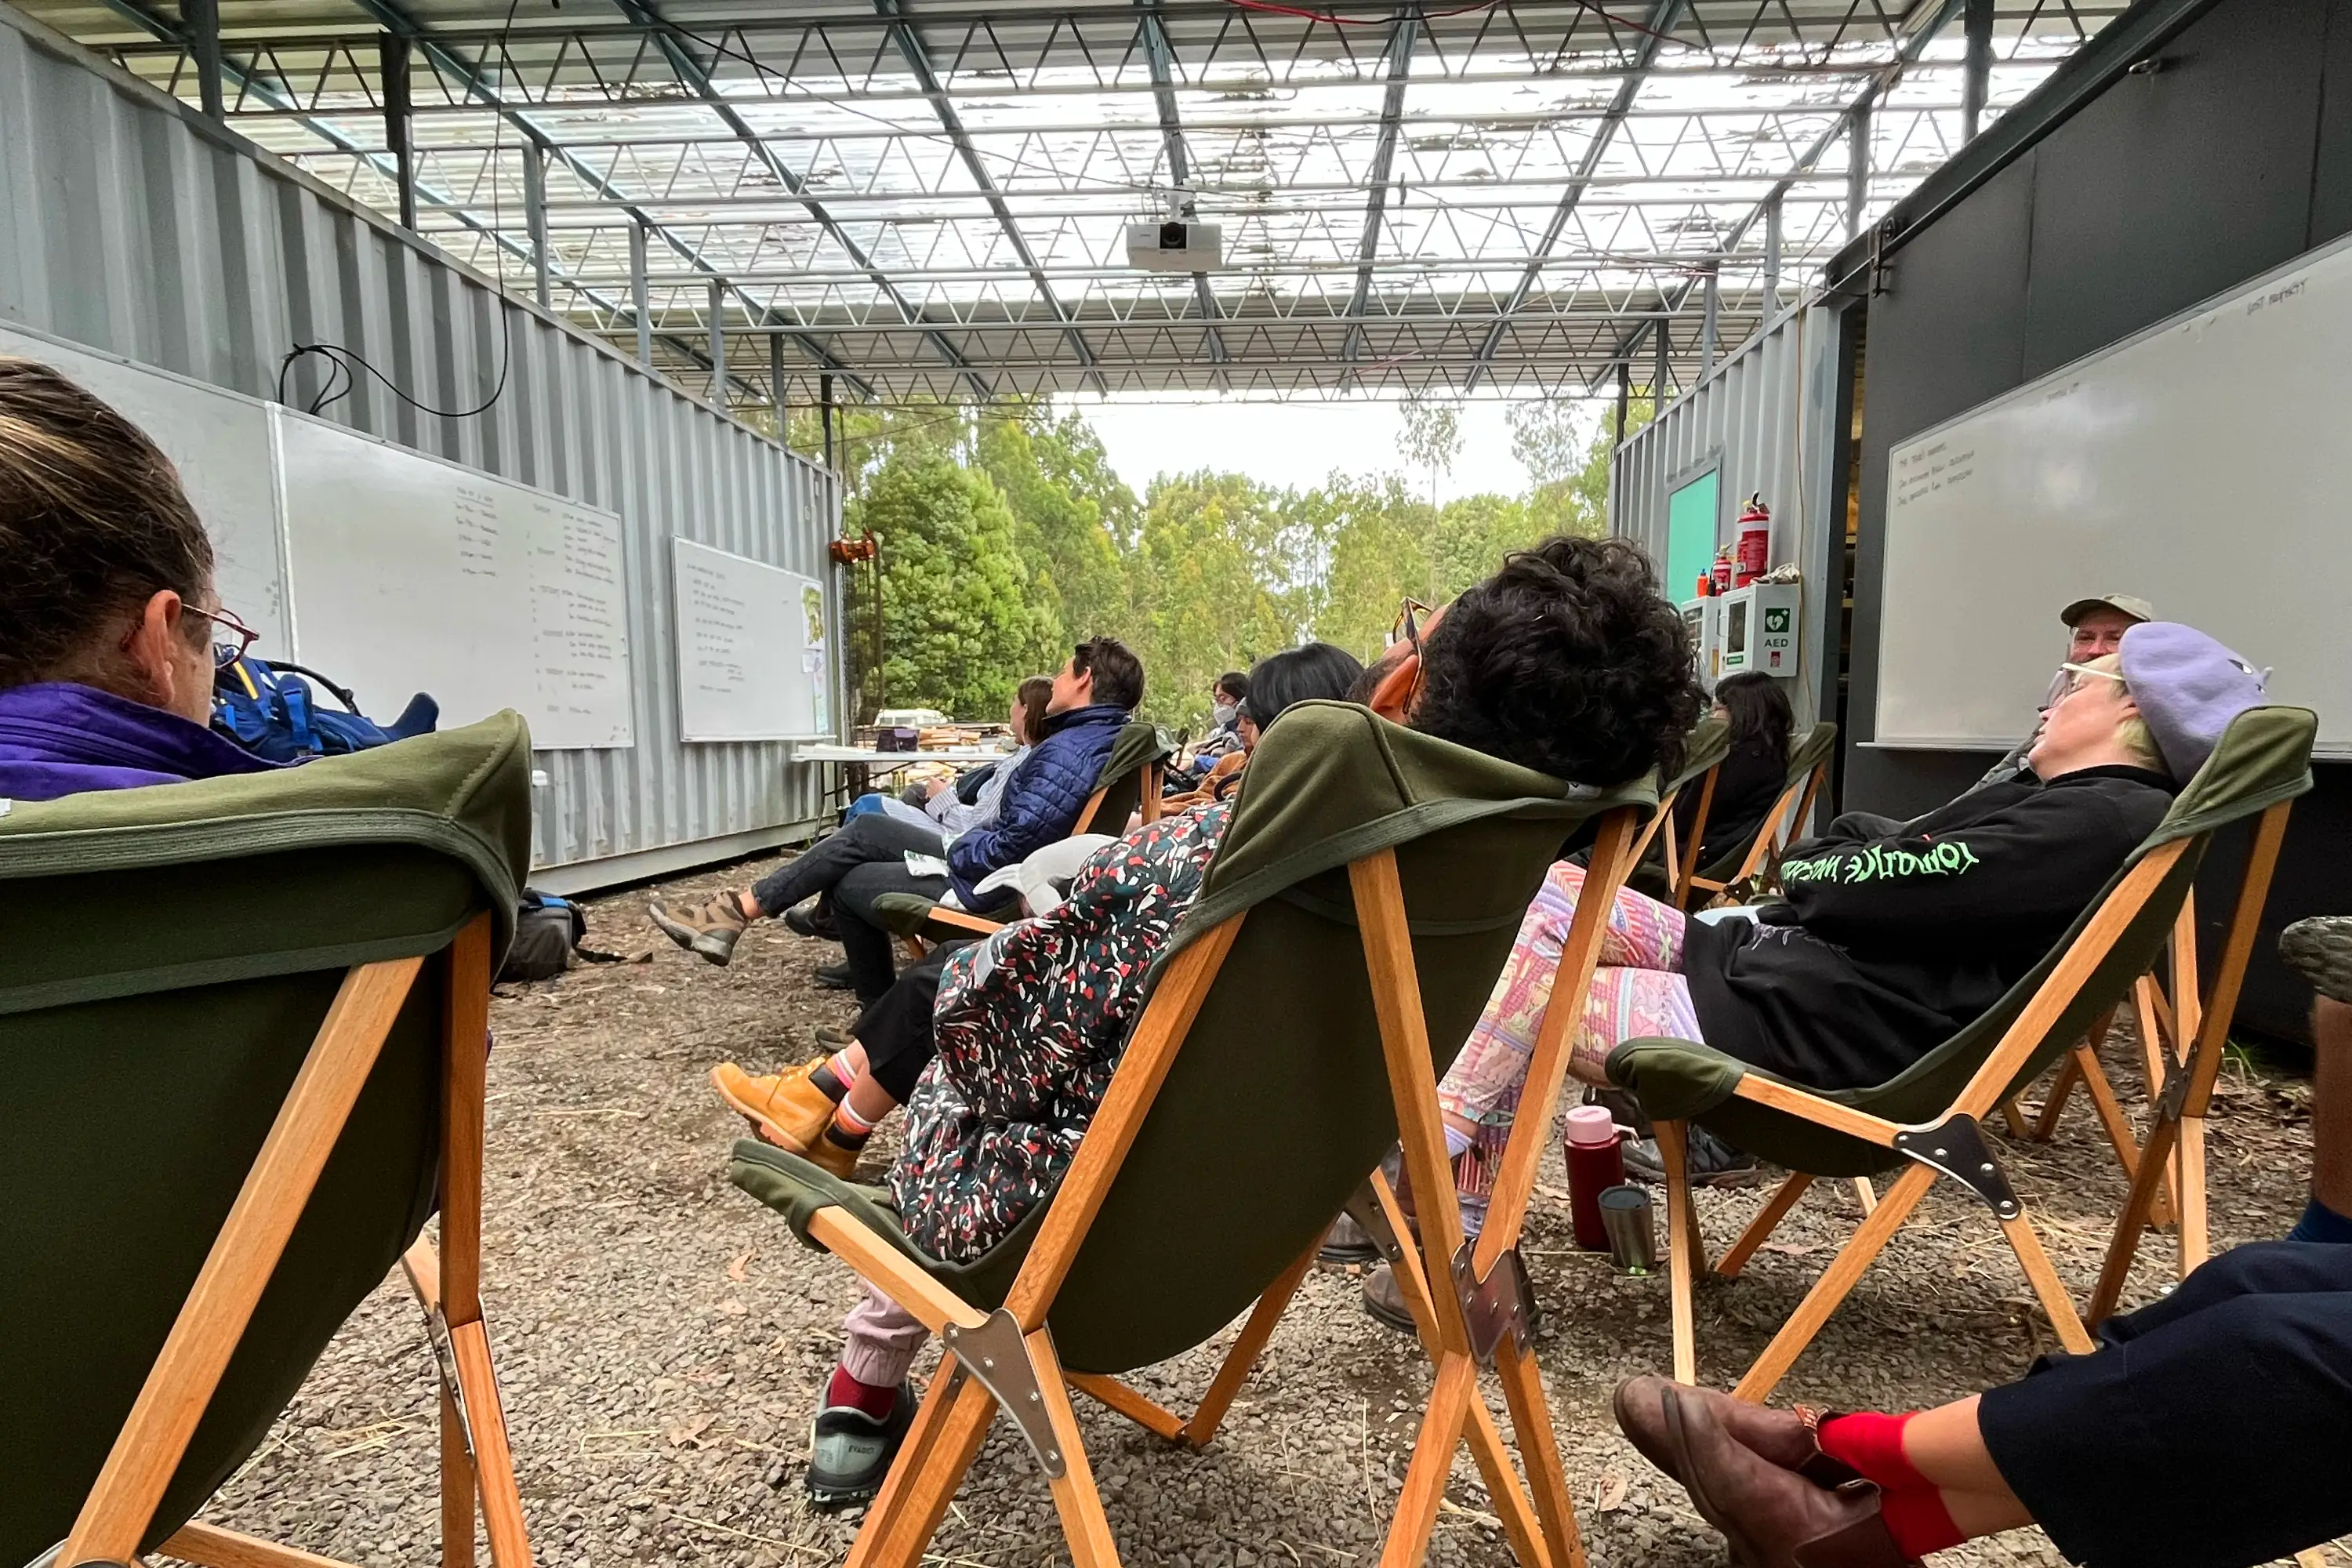 Under an exposed, metal truss roof, and between two shipping containers, a bunch of people sit in luxurious camping chairs on a gravel floor.